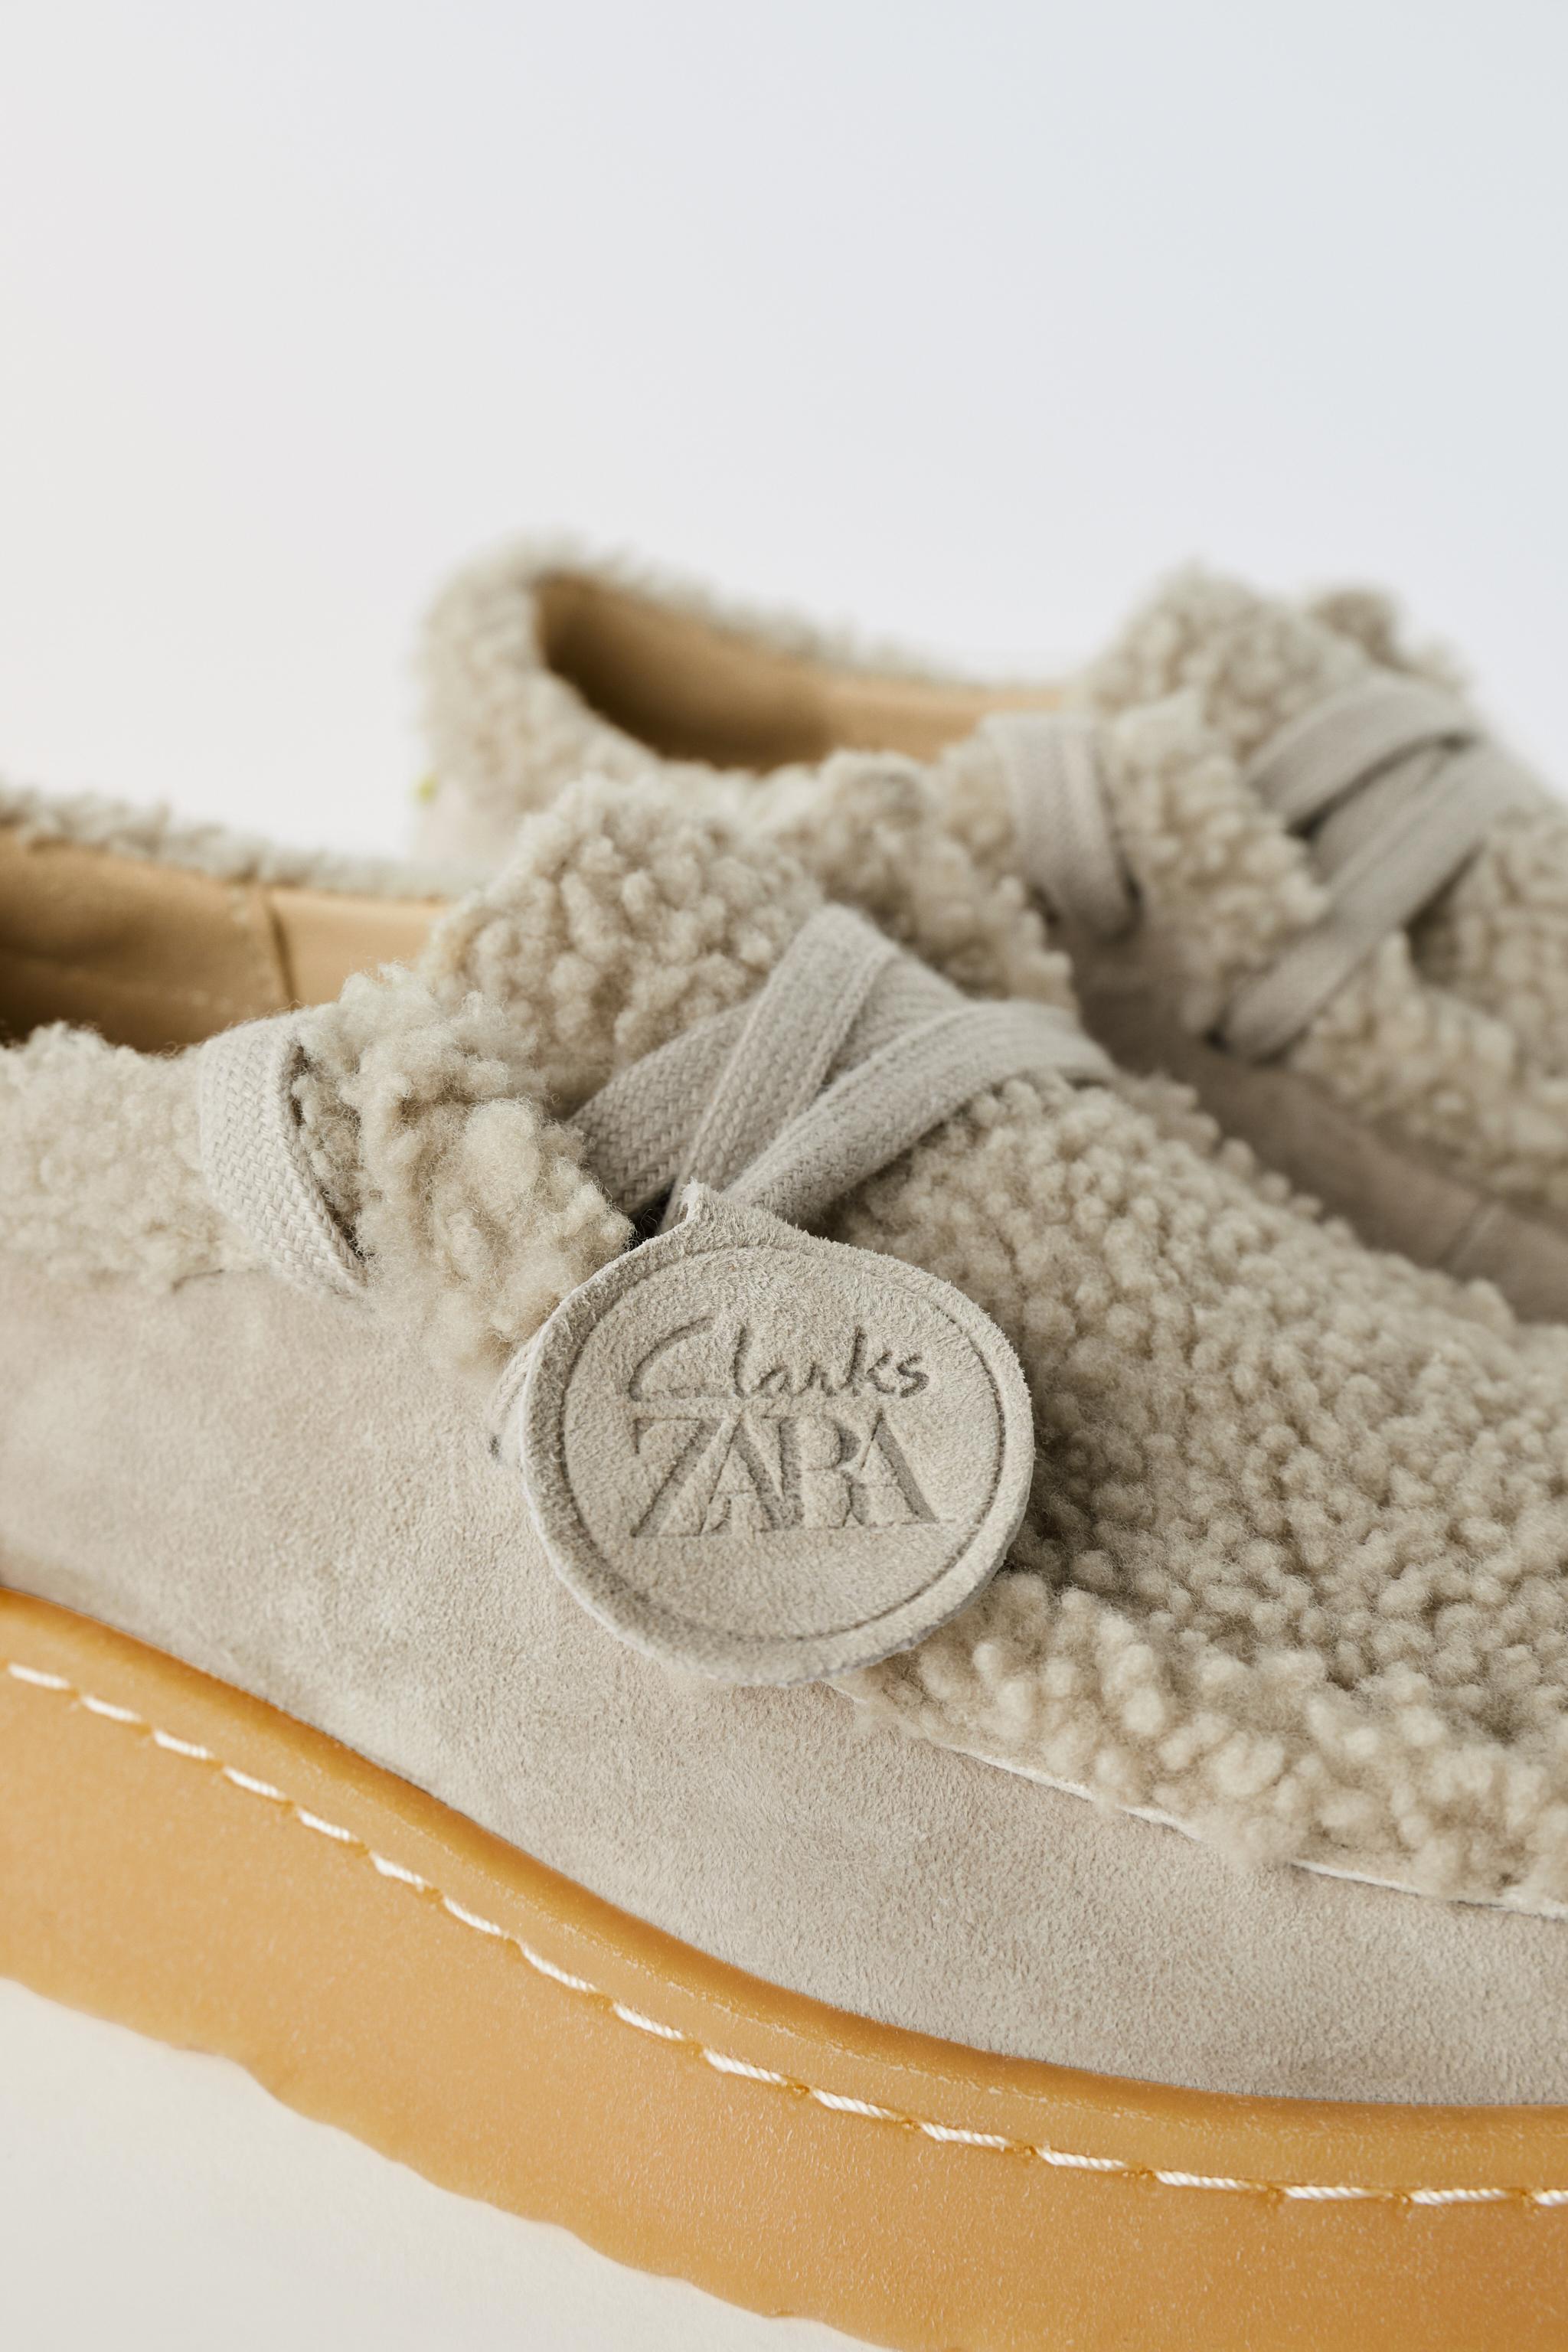 CLARKS® X ZARA LINED LEATHER SHOES